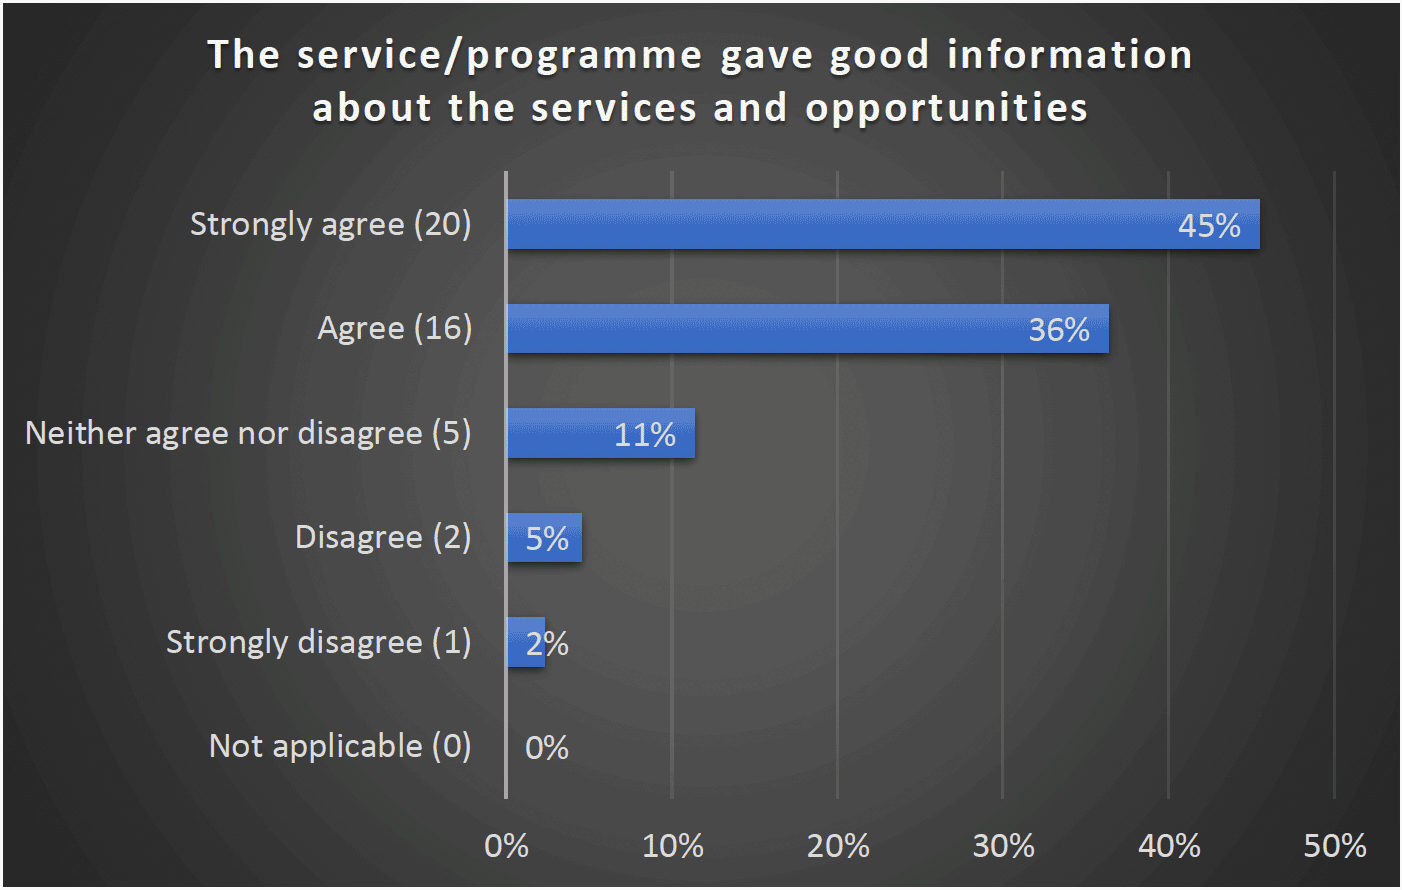 The service/programme gave good information about the services and opportunities - Strongly agree (20) 45%, Agree (16) 36%, Neither agree nor disagree (5) 11%, Disagree (2) 5%, Strongly disagree (1) 2%